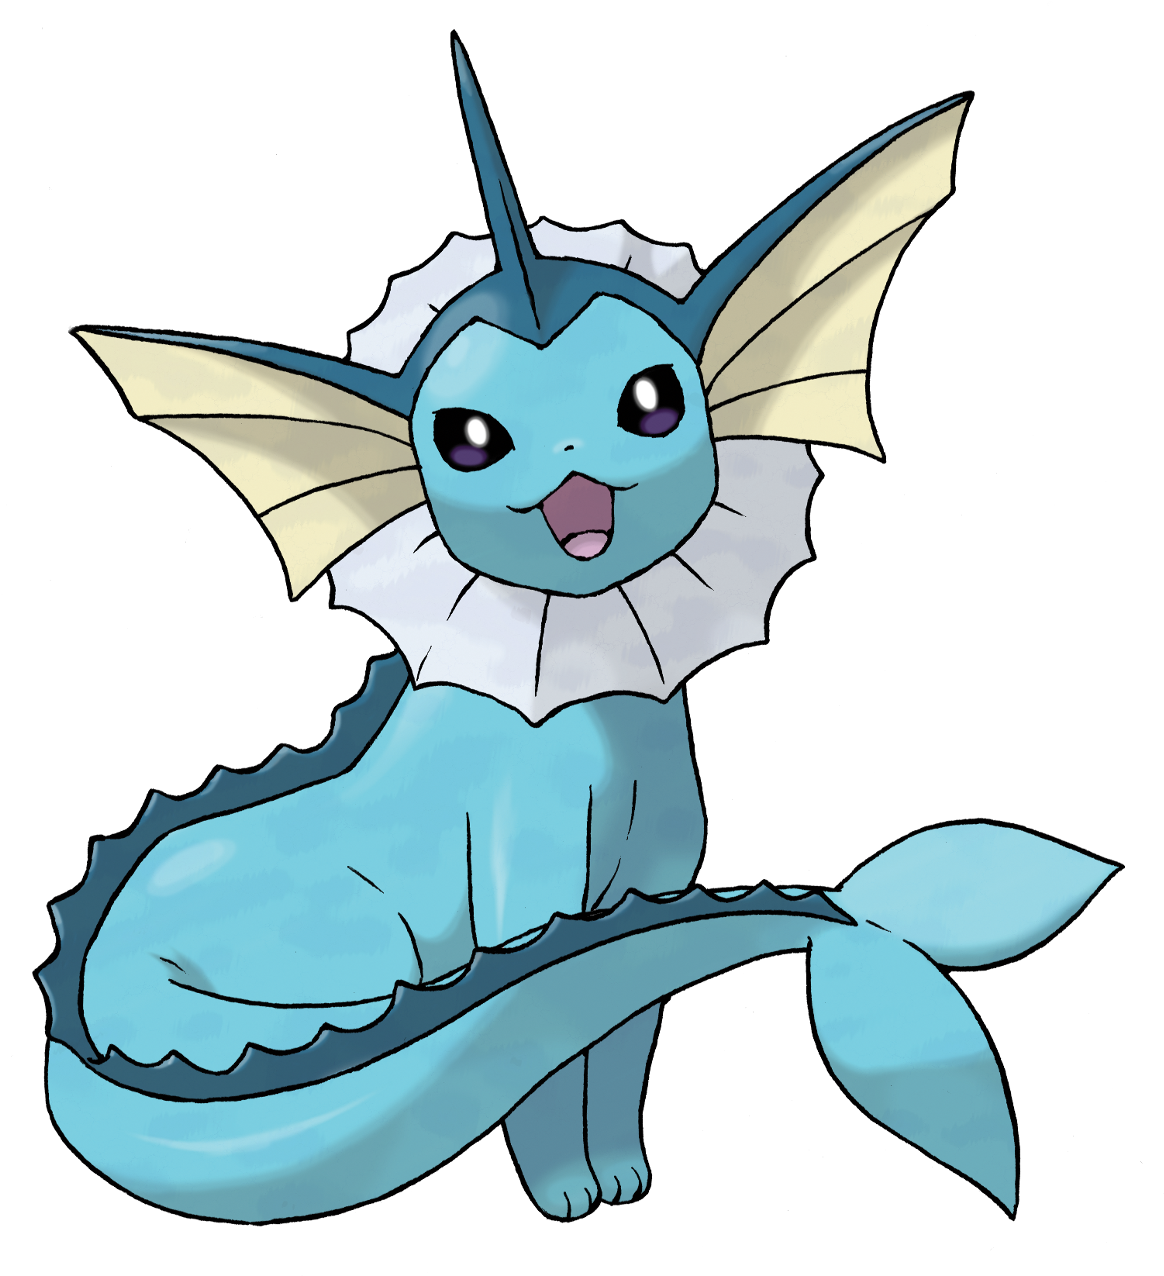 Its Long Tail Is Ridged With A Fin Which Is Often Mistaken - Pokemon Vaporeon (1280x1280)